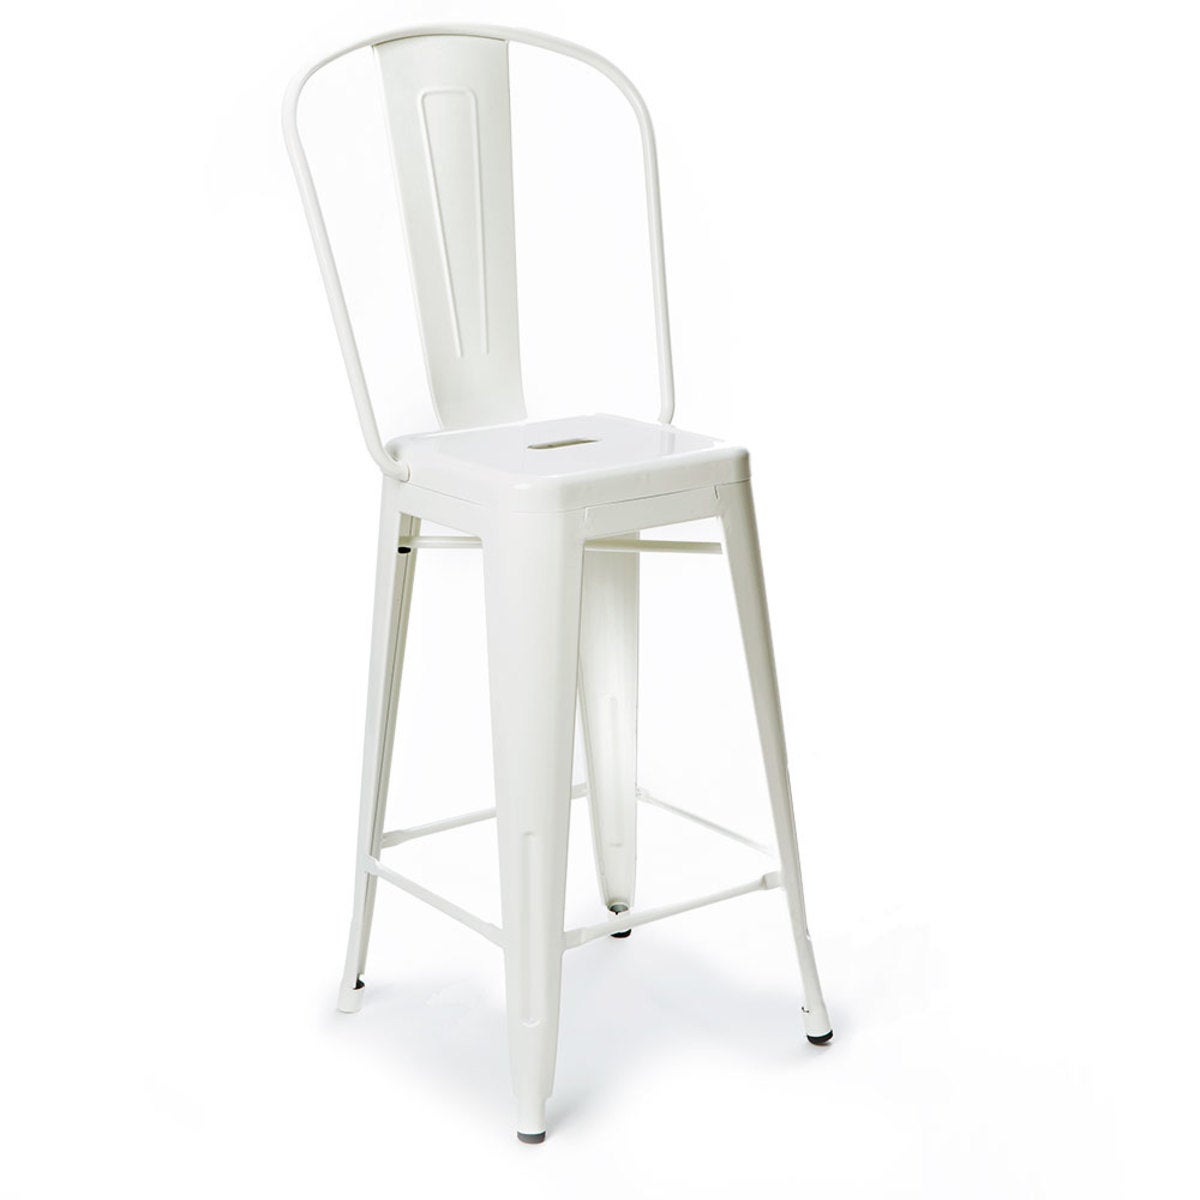 Recycled Industrial Steel Whte Counter Stool - White